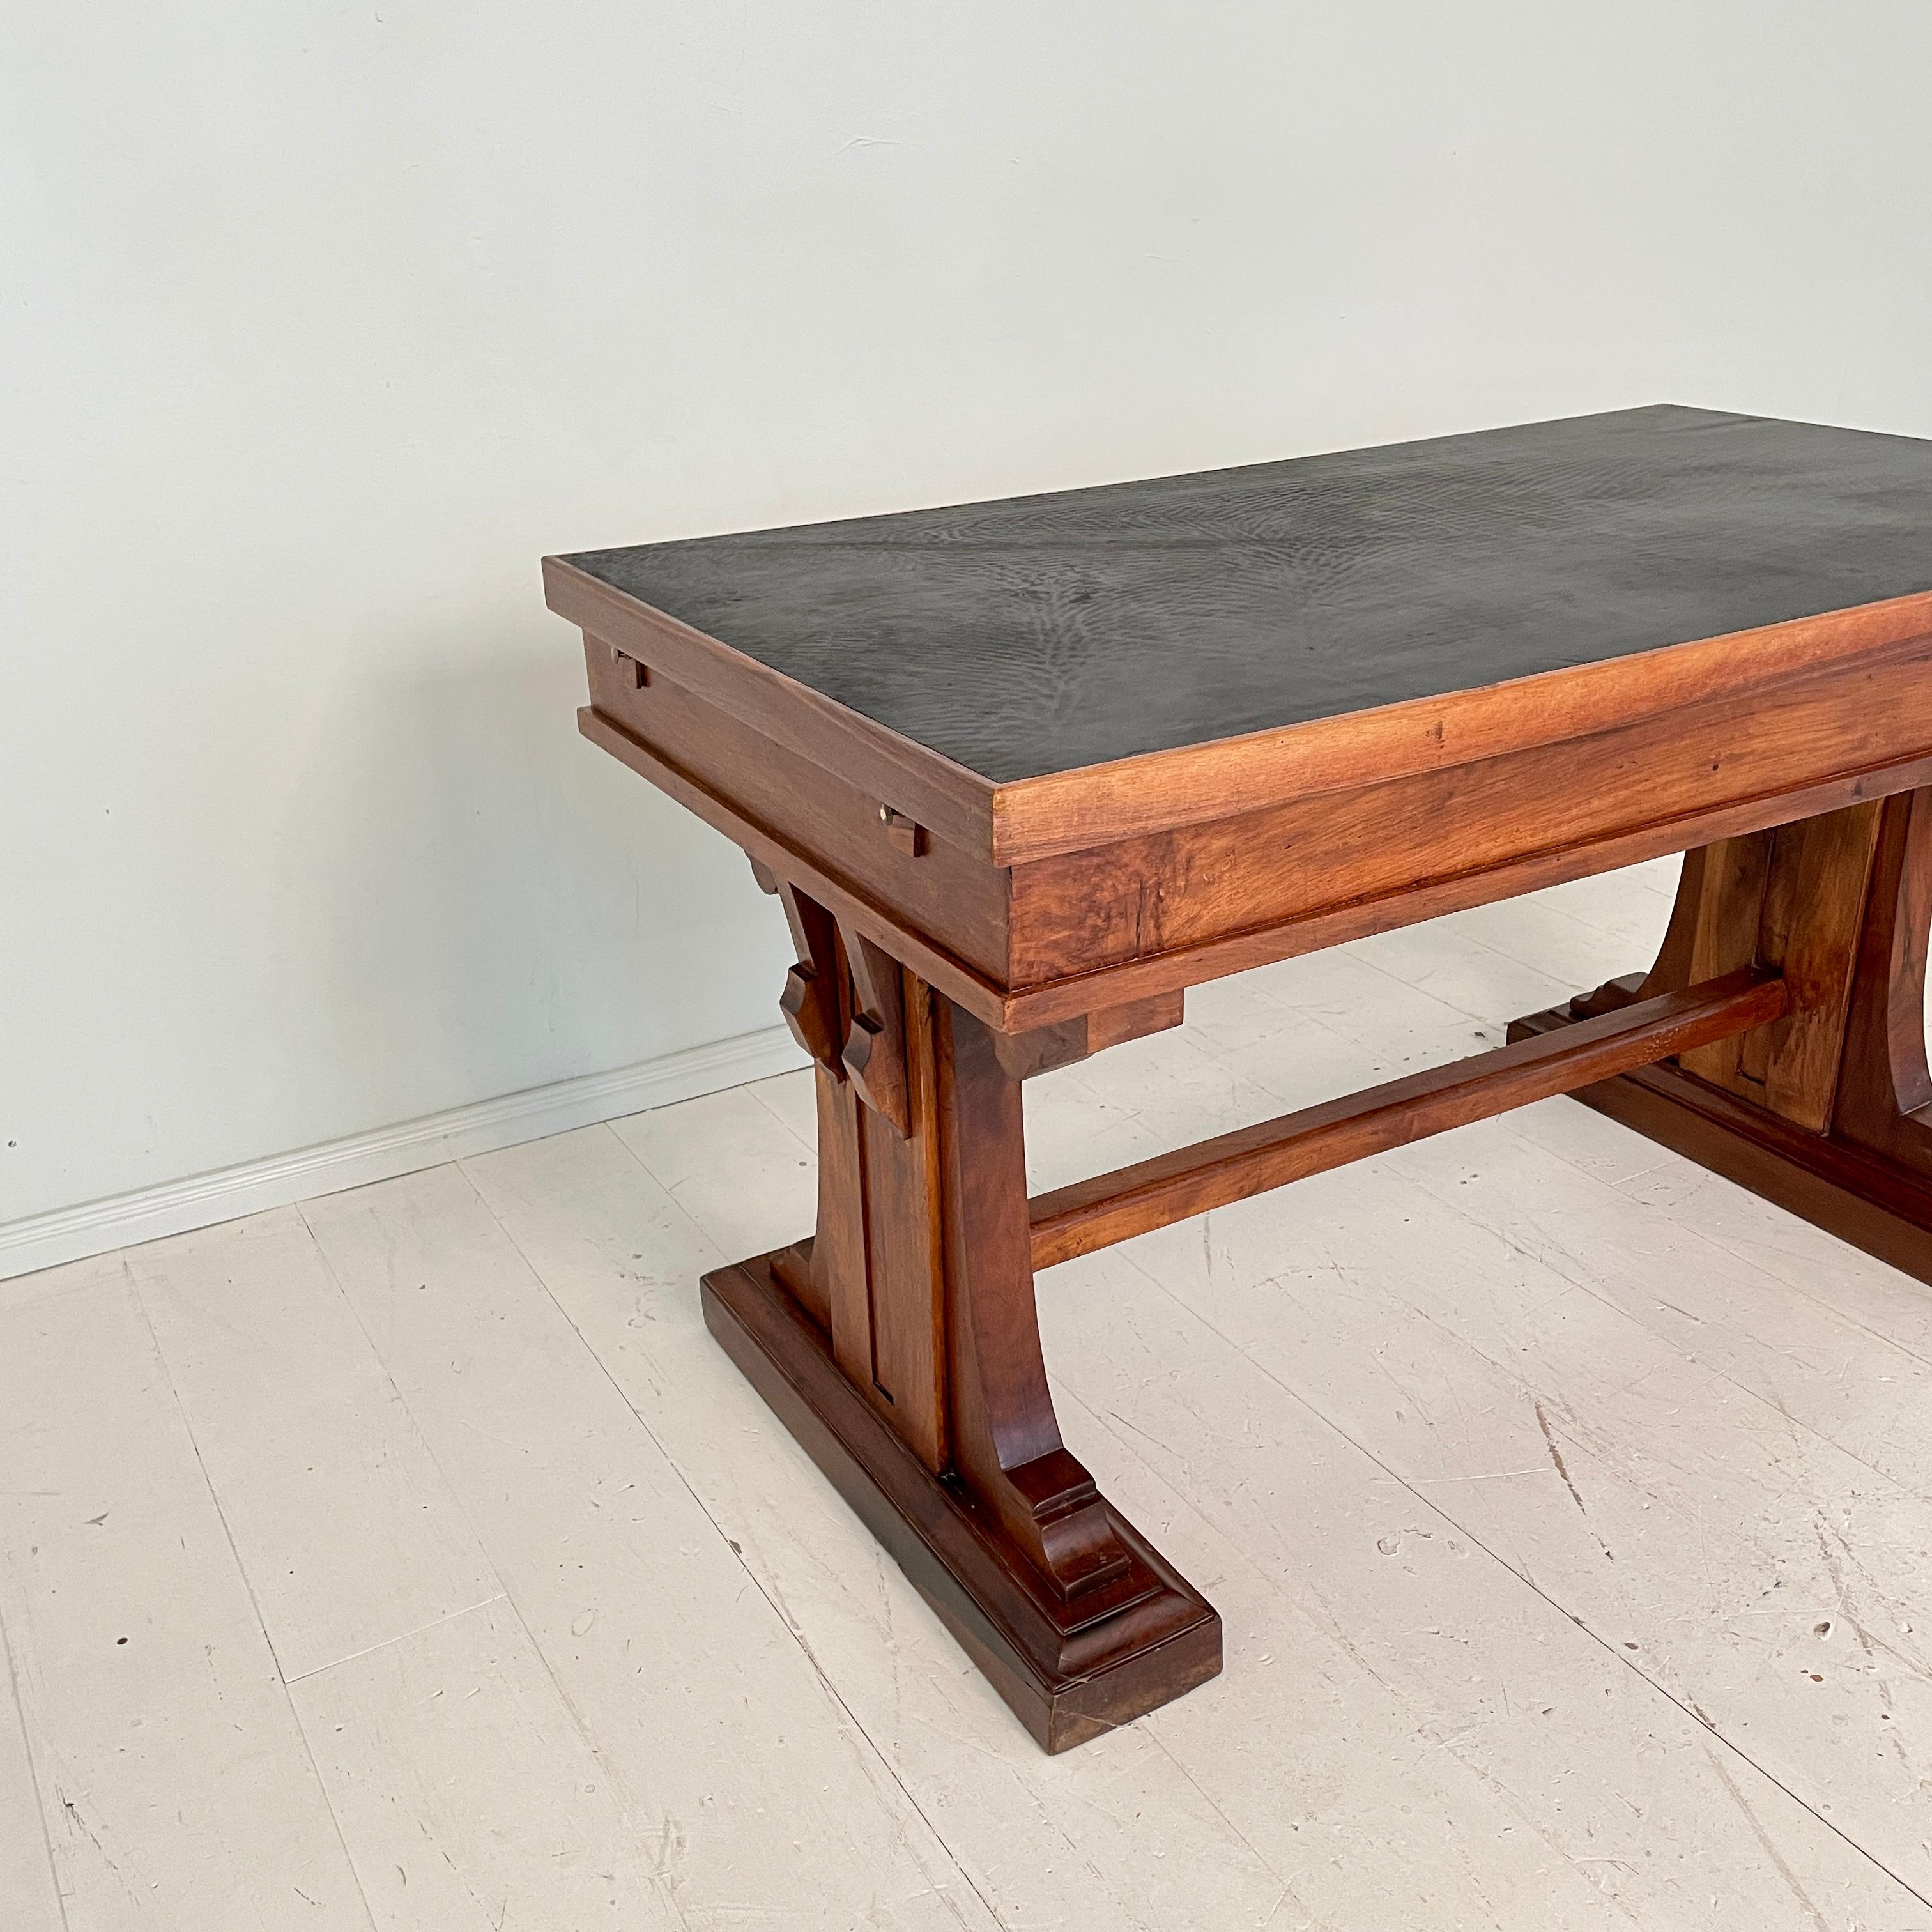 Italian Art Deco Desk or Writing Table in Walnut and Black Leather Top, 1920s 2